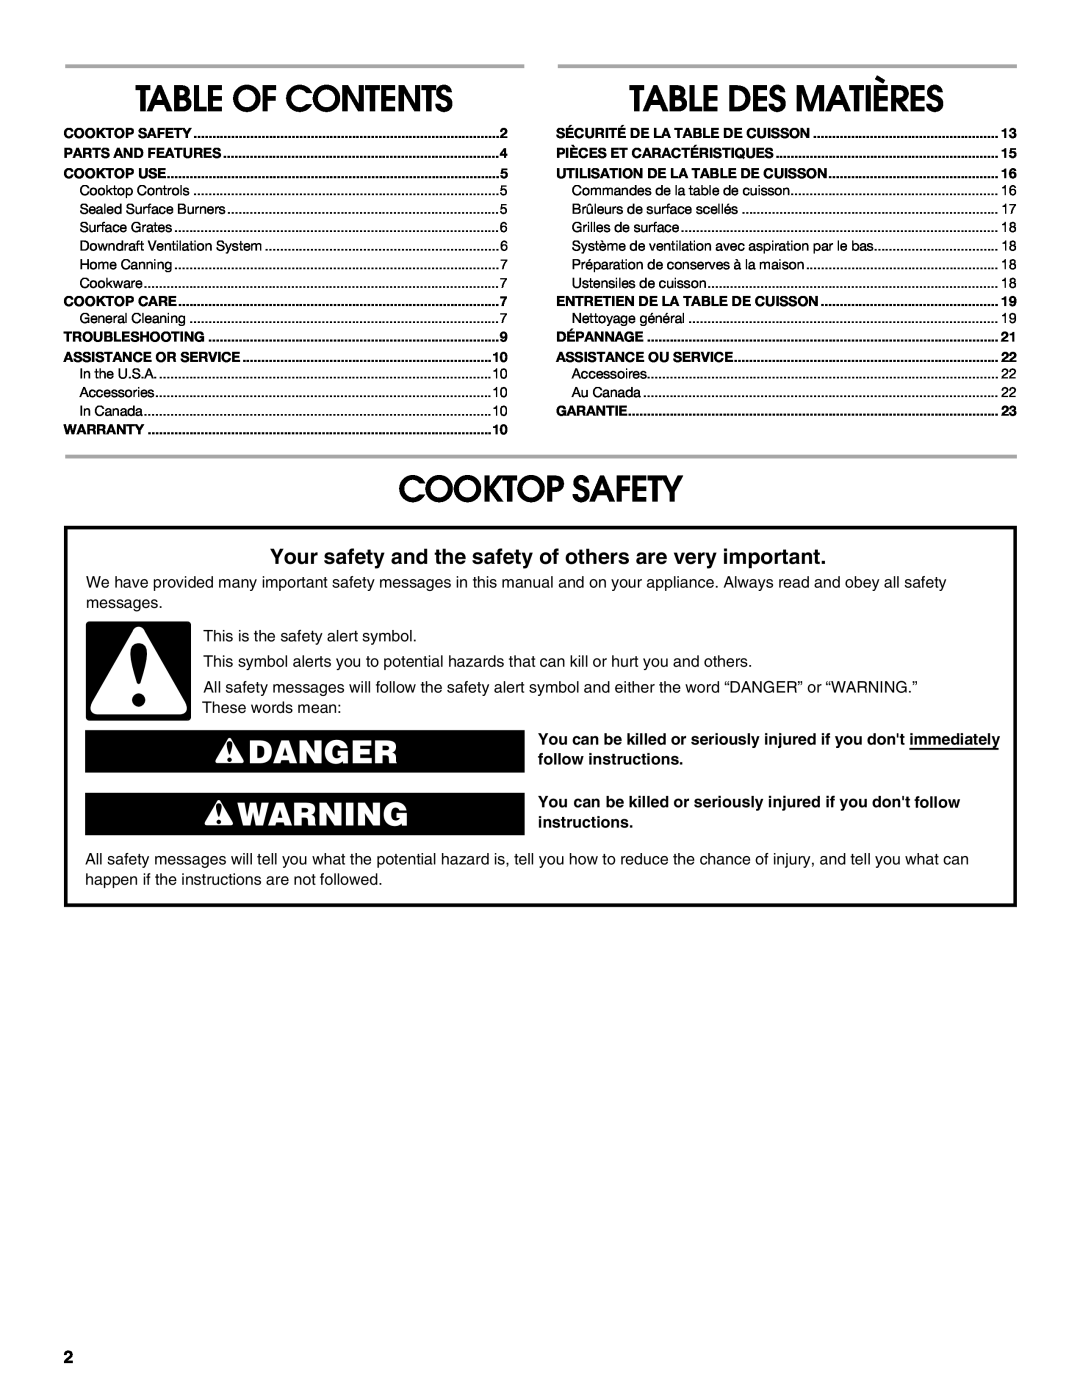 Jenn-Air W10233478B installation instructions Table Of Contents, Cooktop Safety, Danger, Table Des Matières 